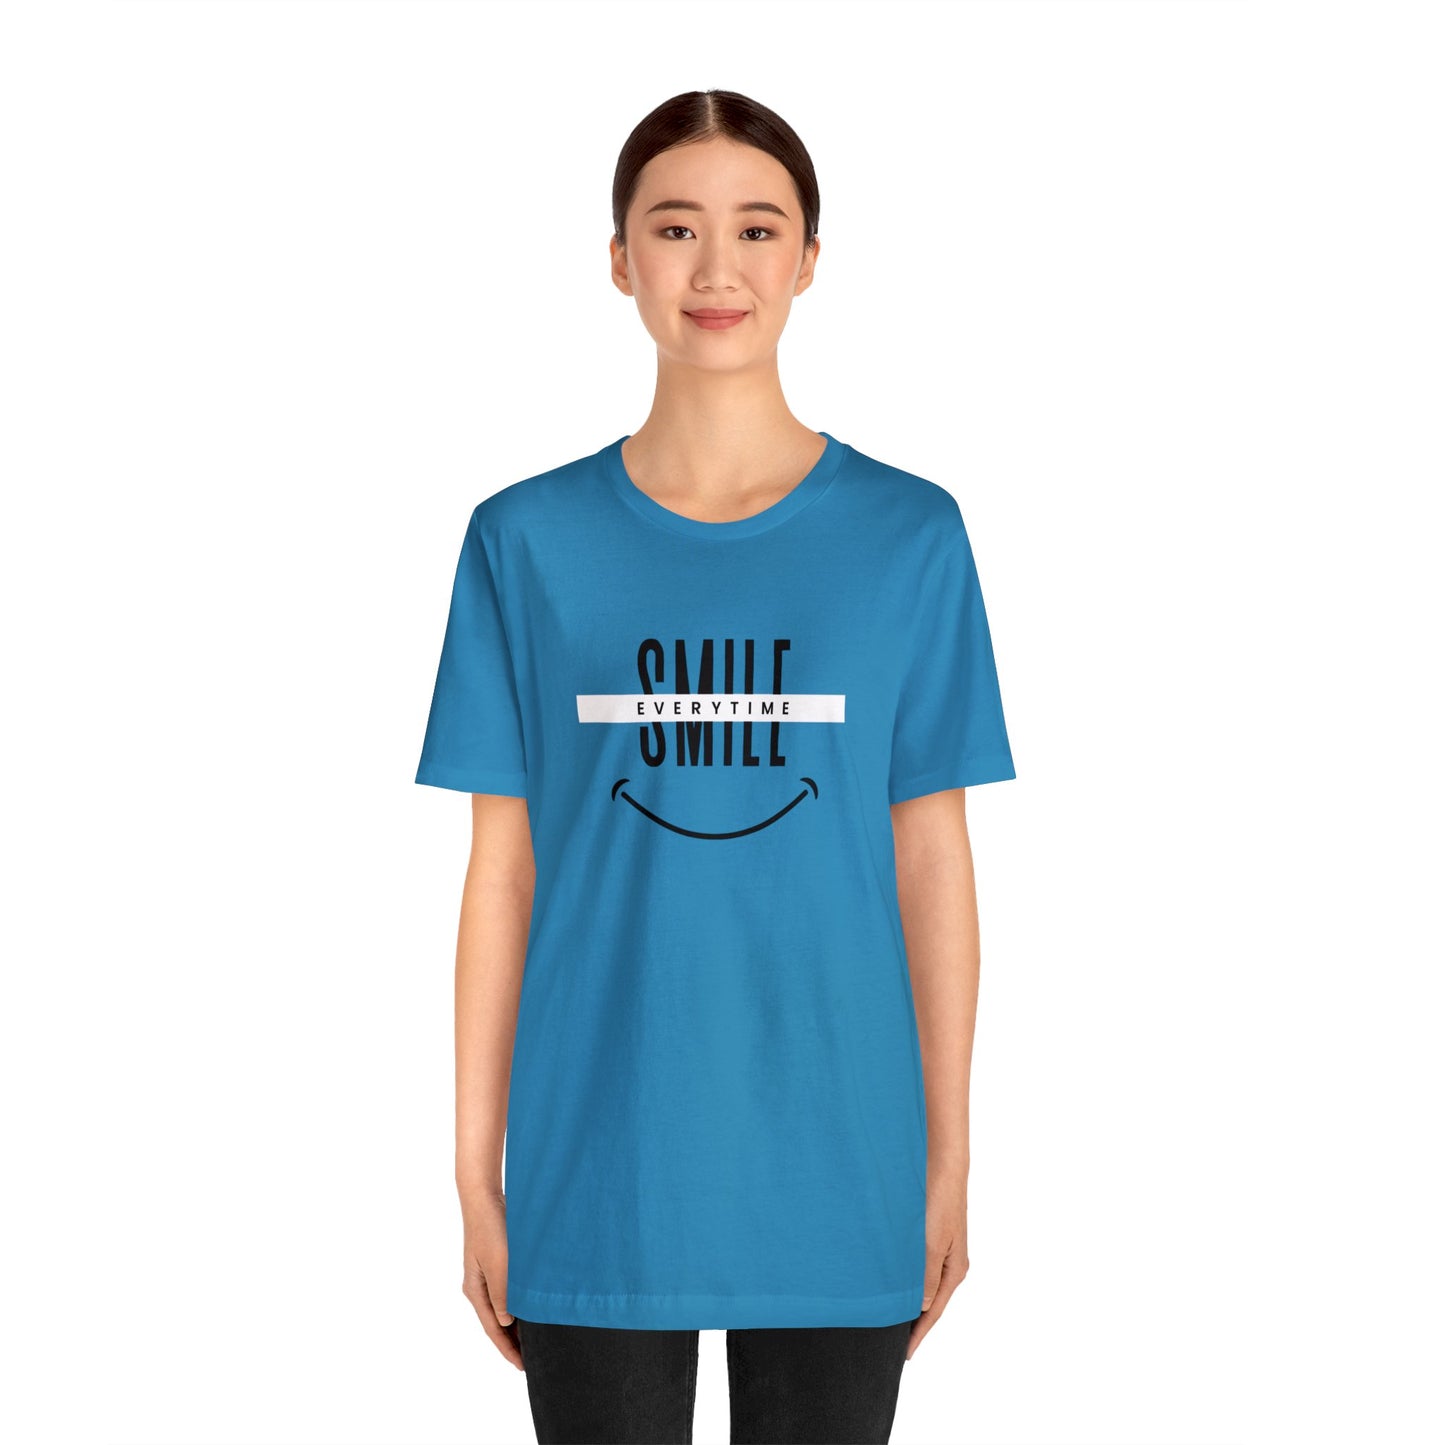 'Smile Everytime' Unisex Cotton T-shirt - Human Rights Fighter Collection